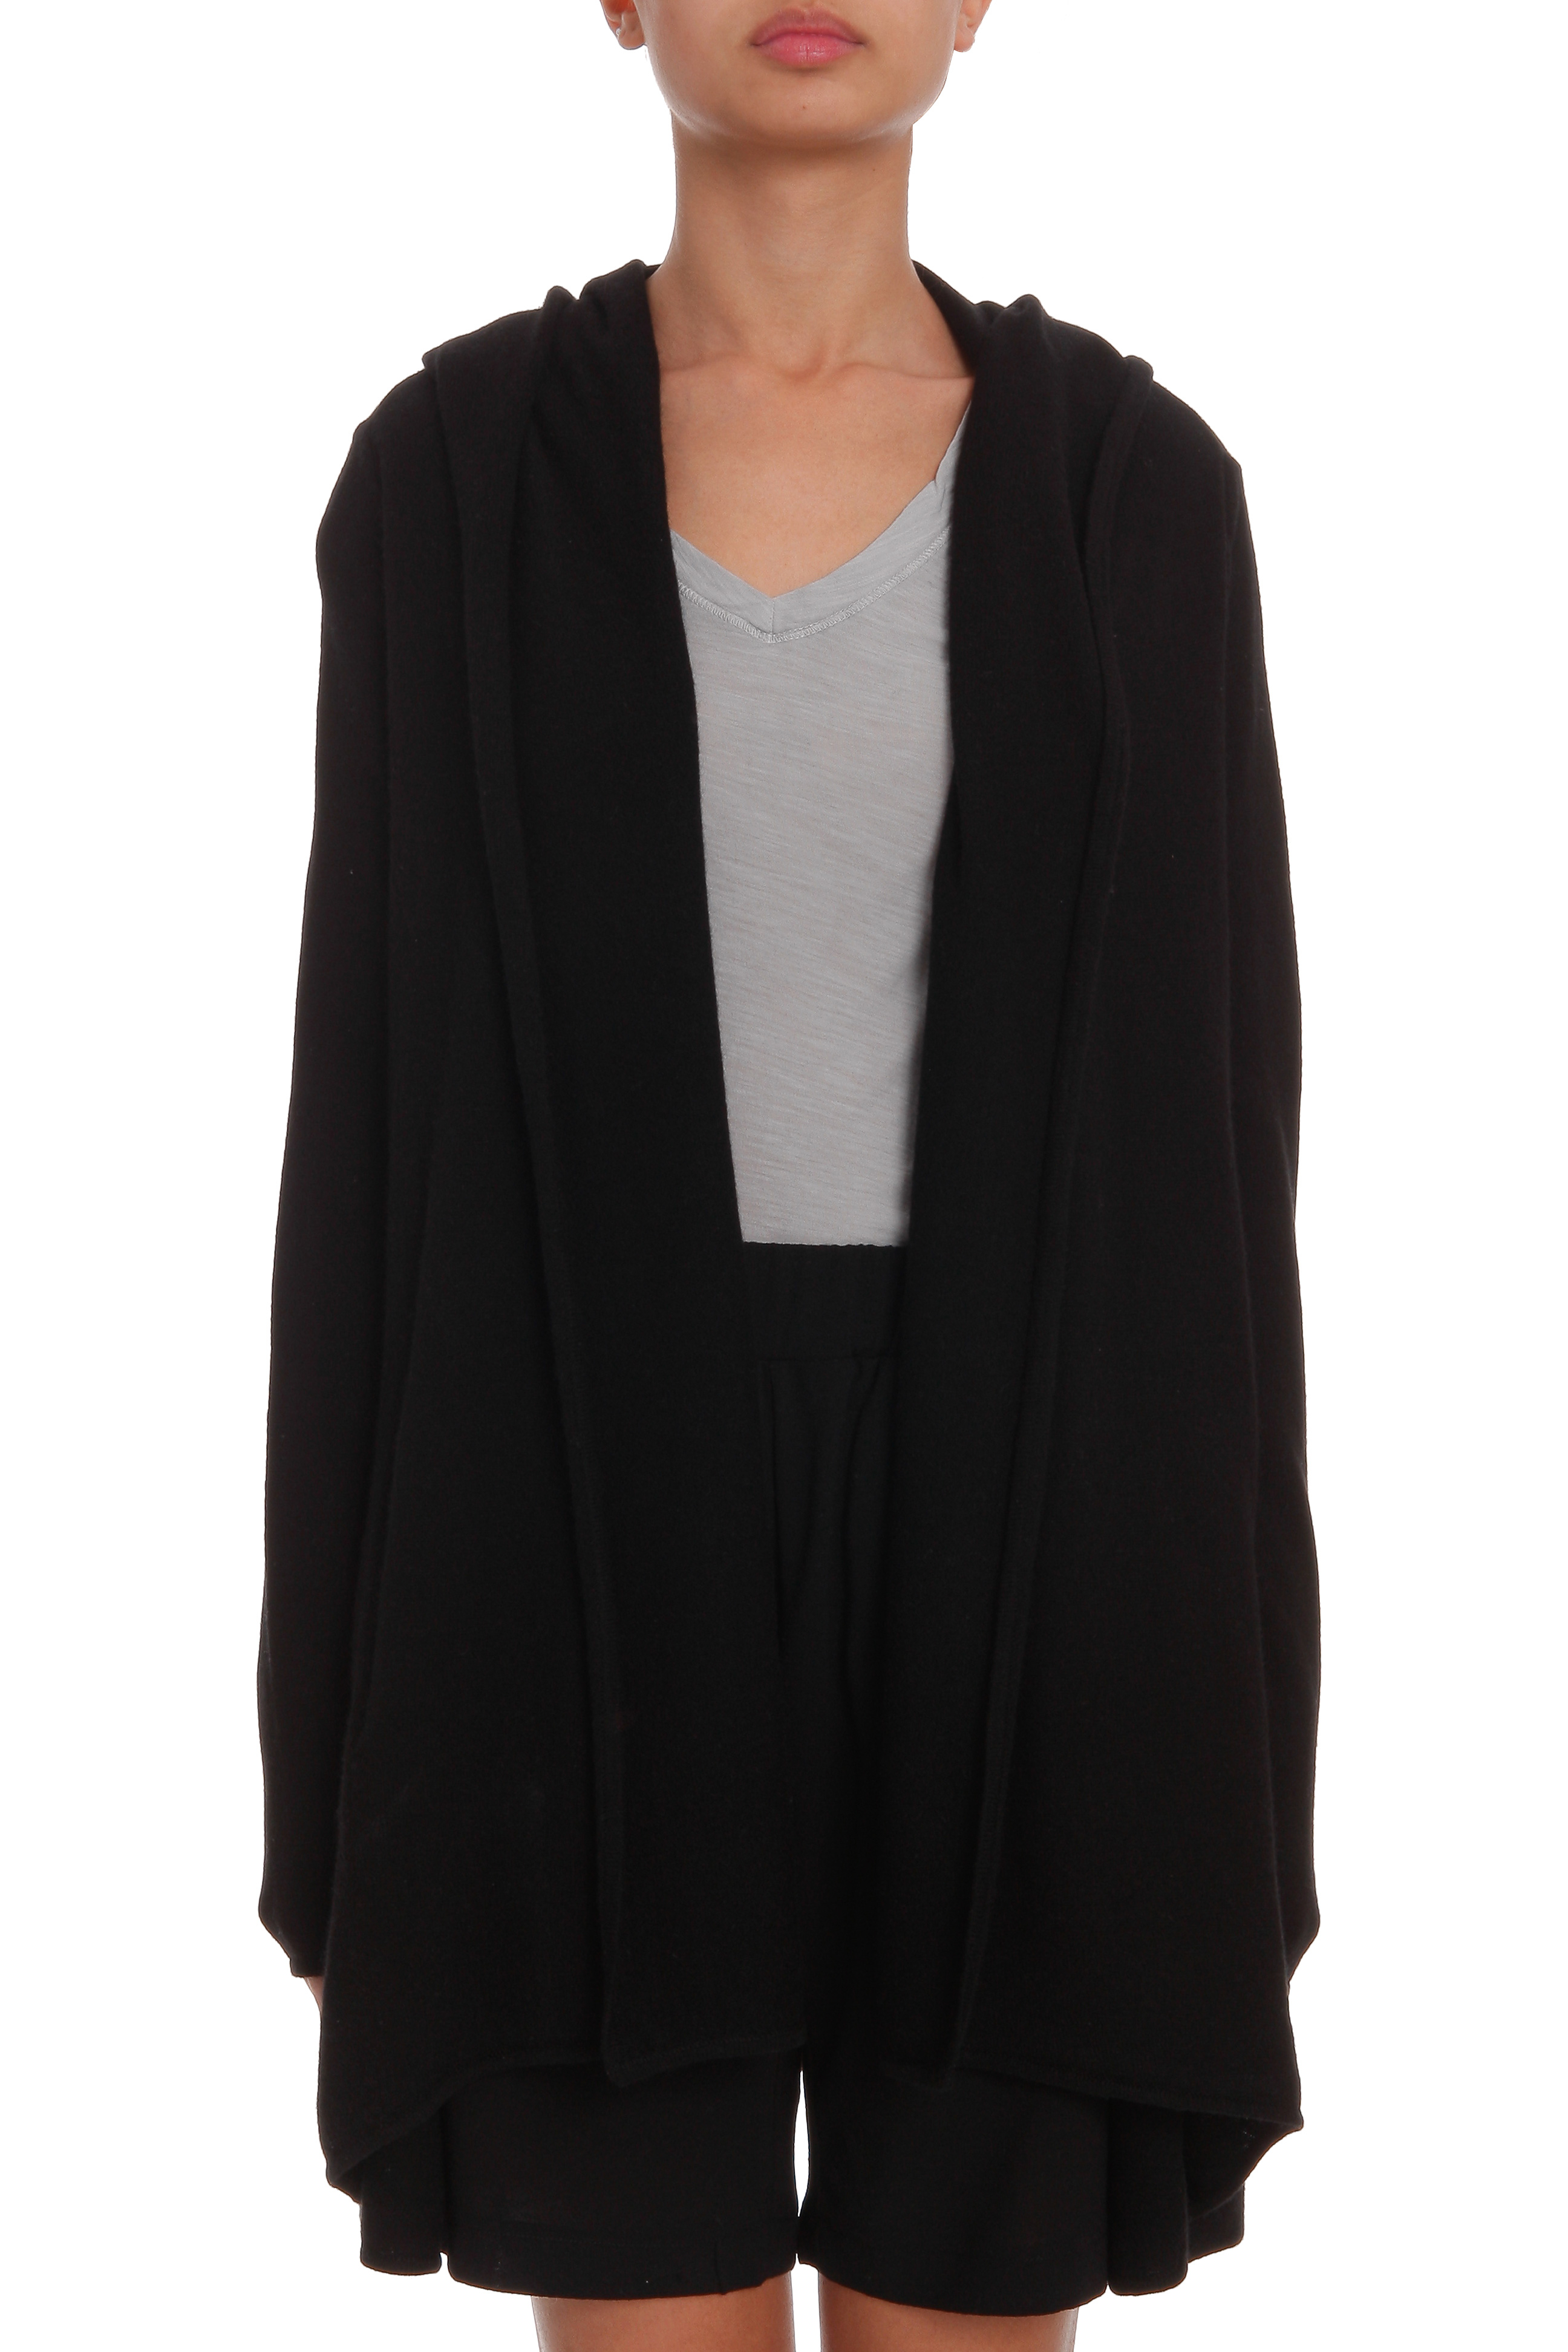 Vince Cashmere Hooded Cardigan in Black | Lyst